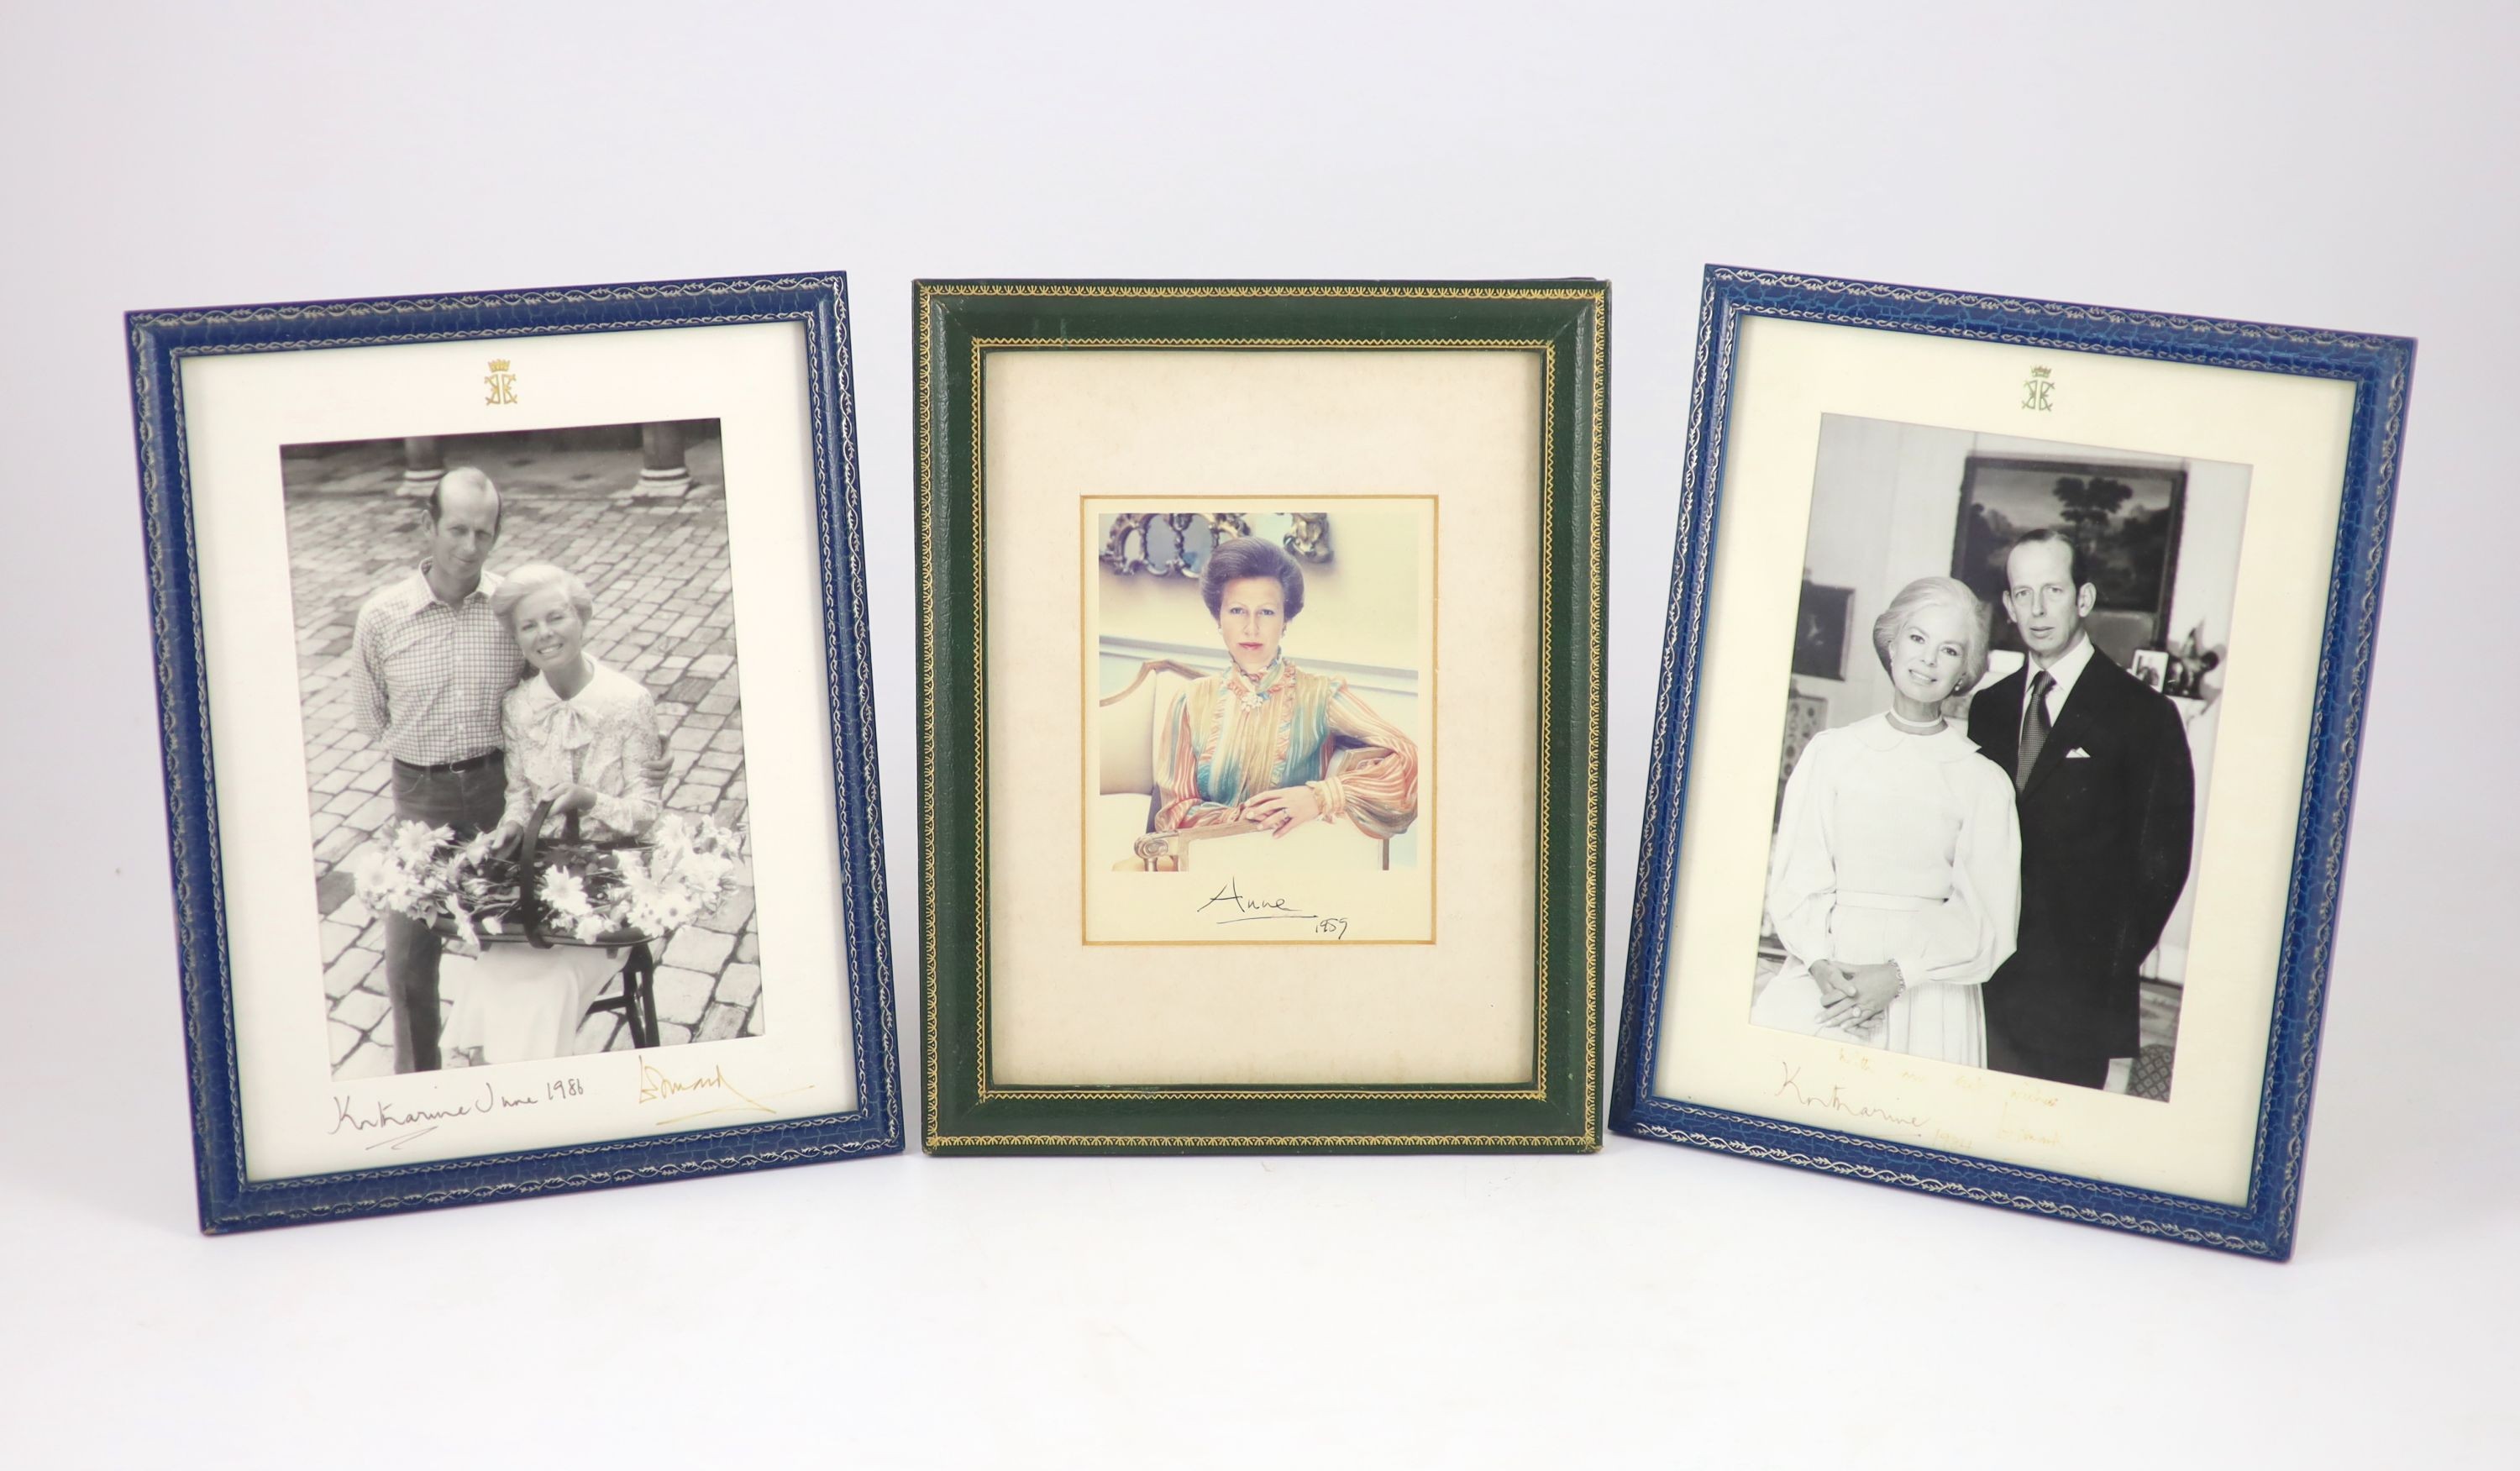 Anne, Princess of England - a signed colour portrait photograph, dated 1989, 11.5 x 8.5cms., together with 2 black and white portrait photographs of the Duke and Duchess of Kent, each signed, ‘’Katherine’’ and ‘’Edward’’